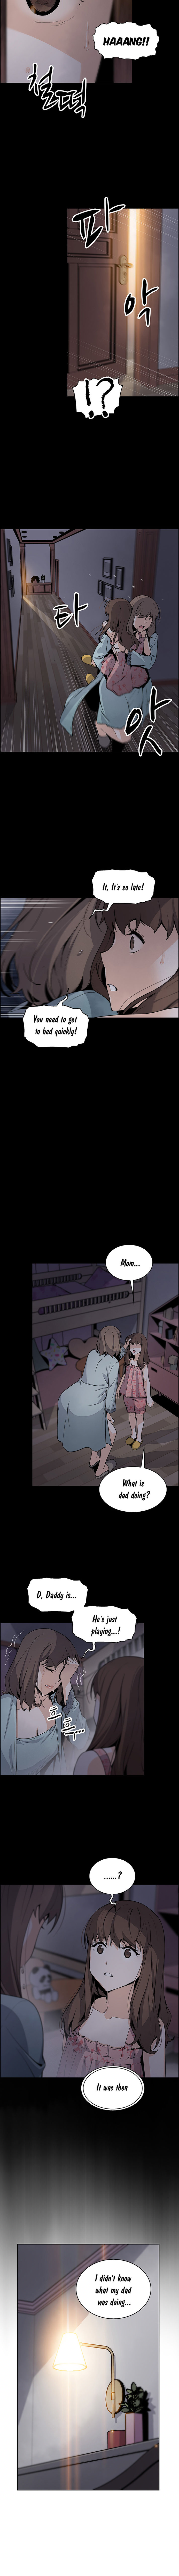 Housekeeper Manhwa - Chapter 43 Page 4